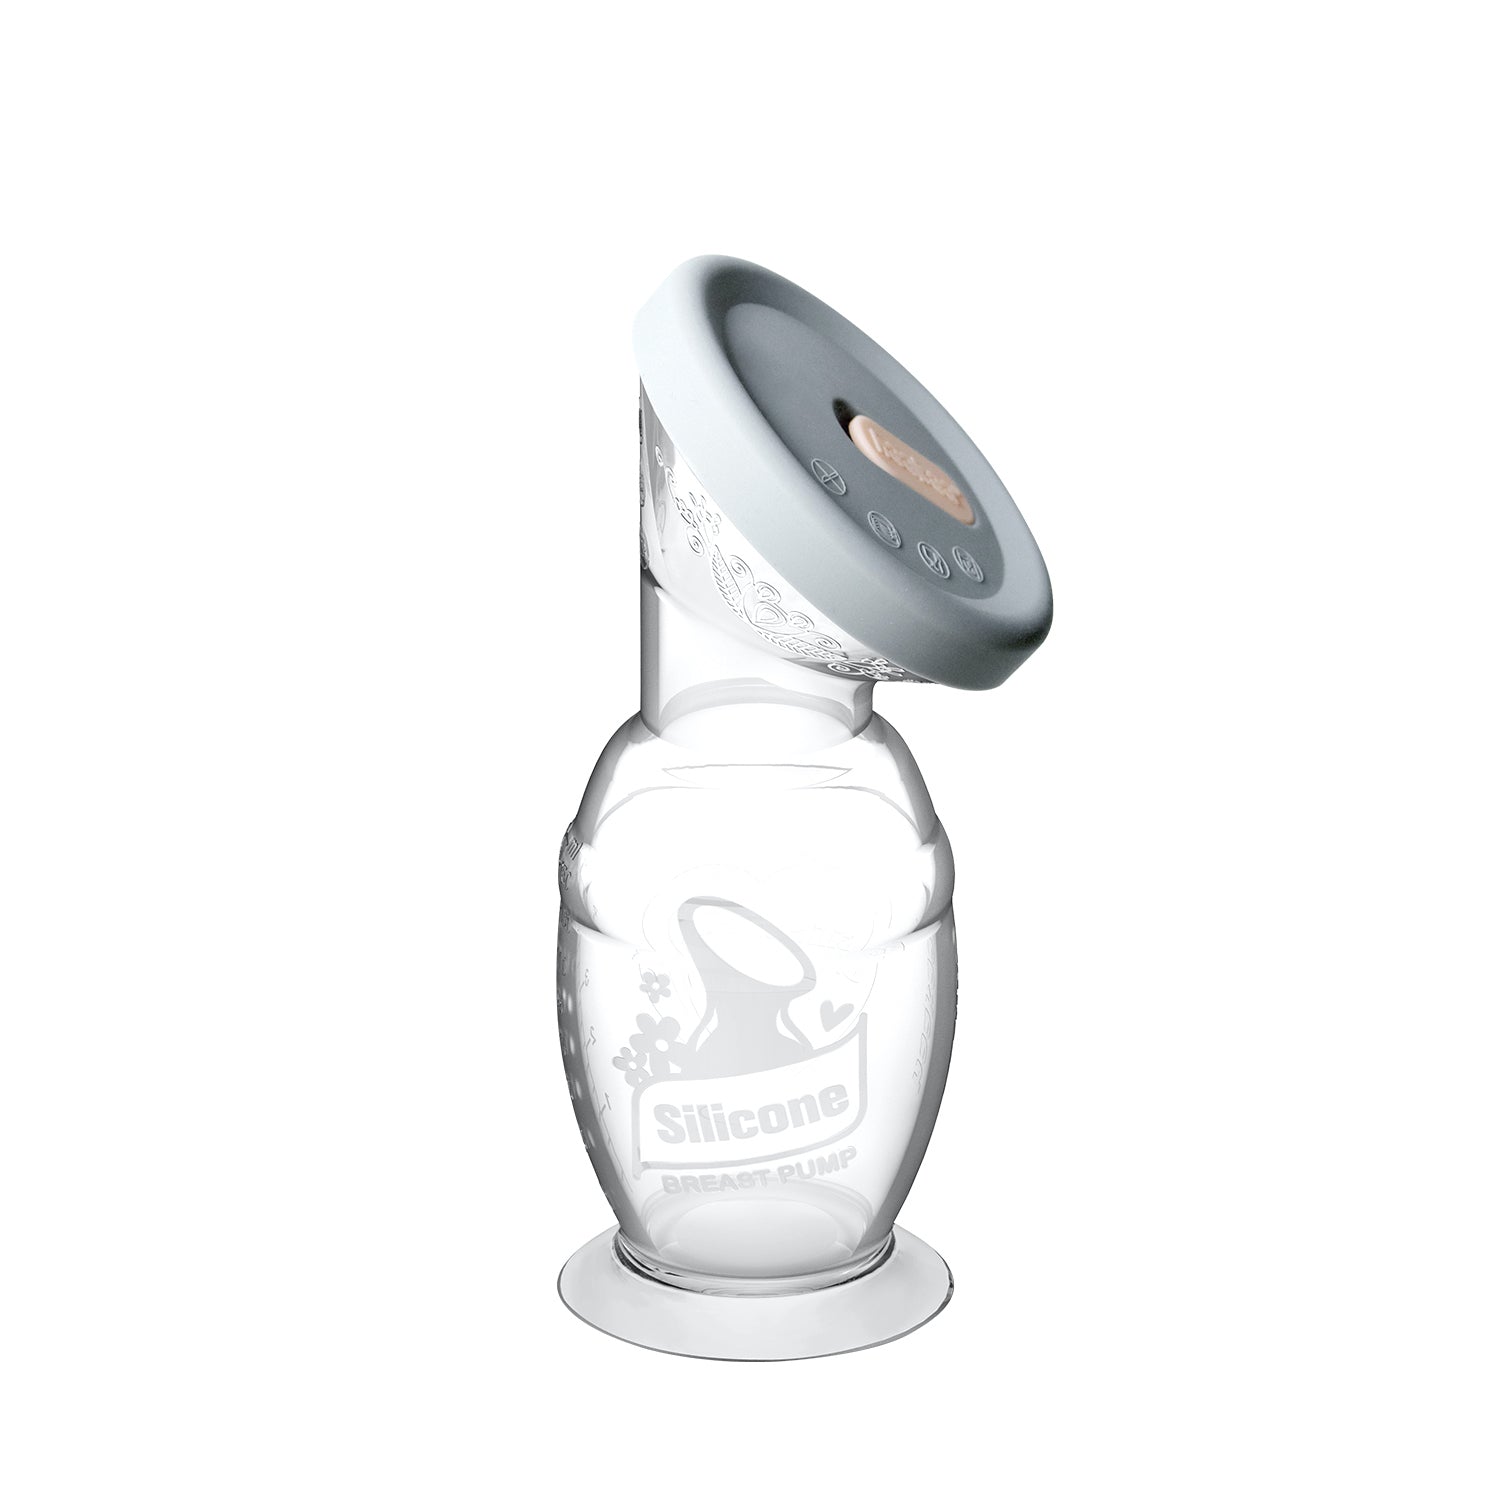 A Haakaa Silicone Breast Pump & Silicone Cap Gen 2 with a lid on it.